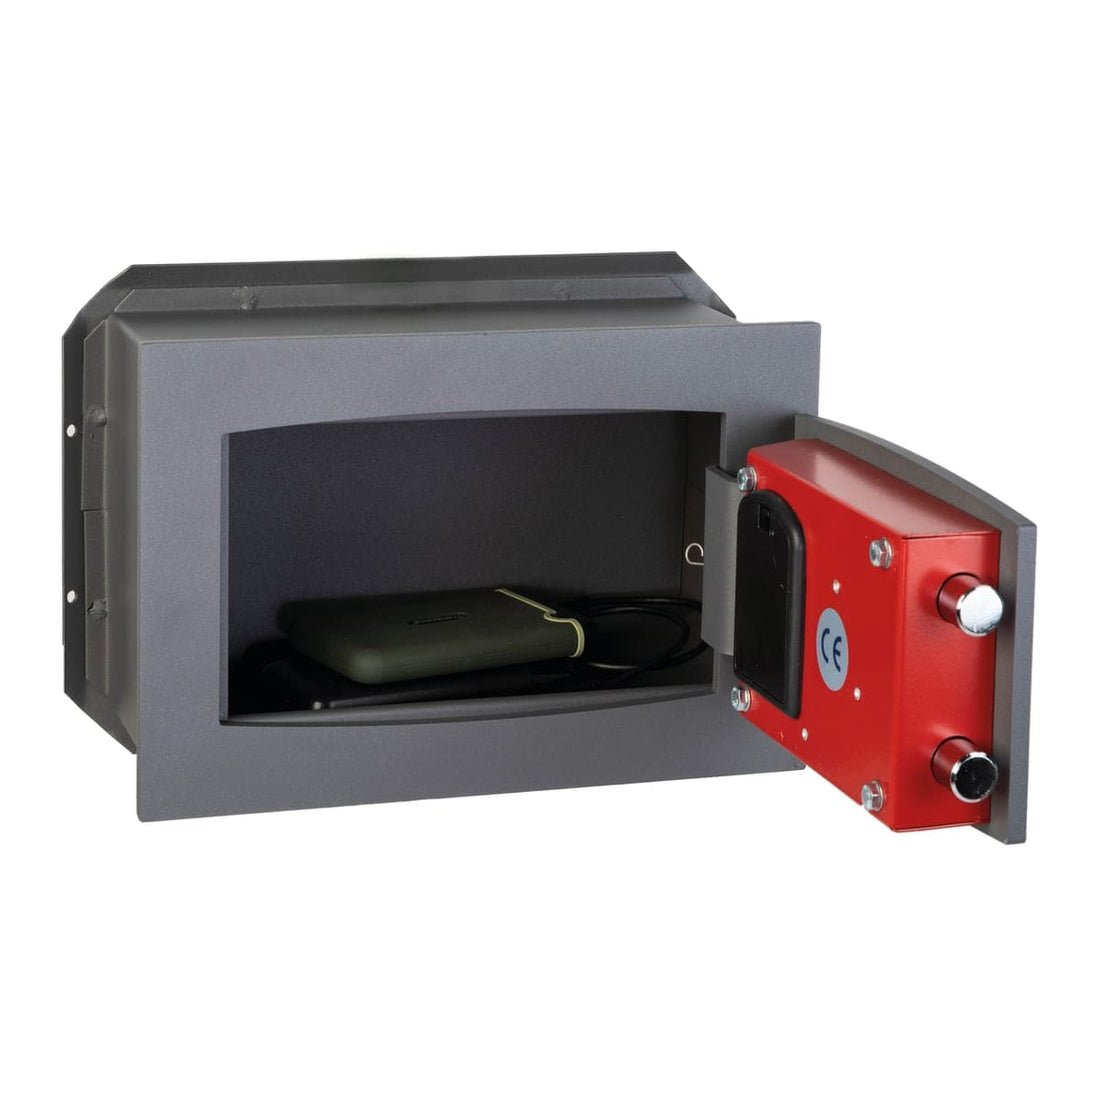 RSE-3B ELECTRONIC CODE SAFE BUILT-IN 31X15XH 21 CM - best price from Maltashopper.com BR410004140